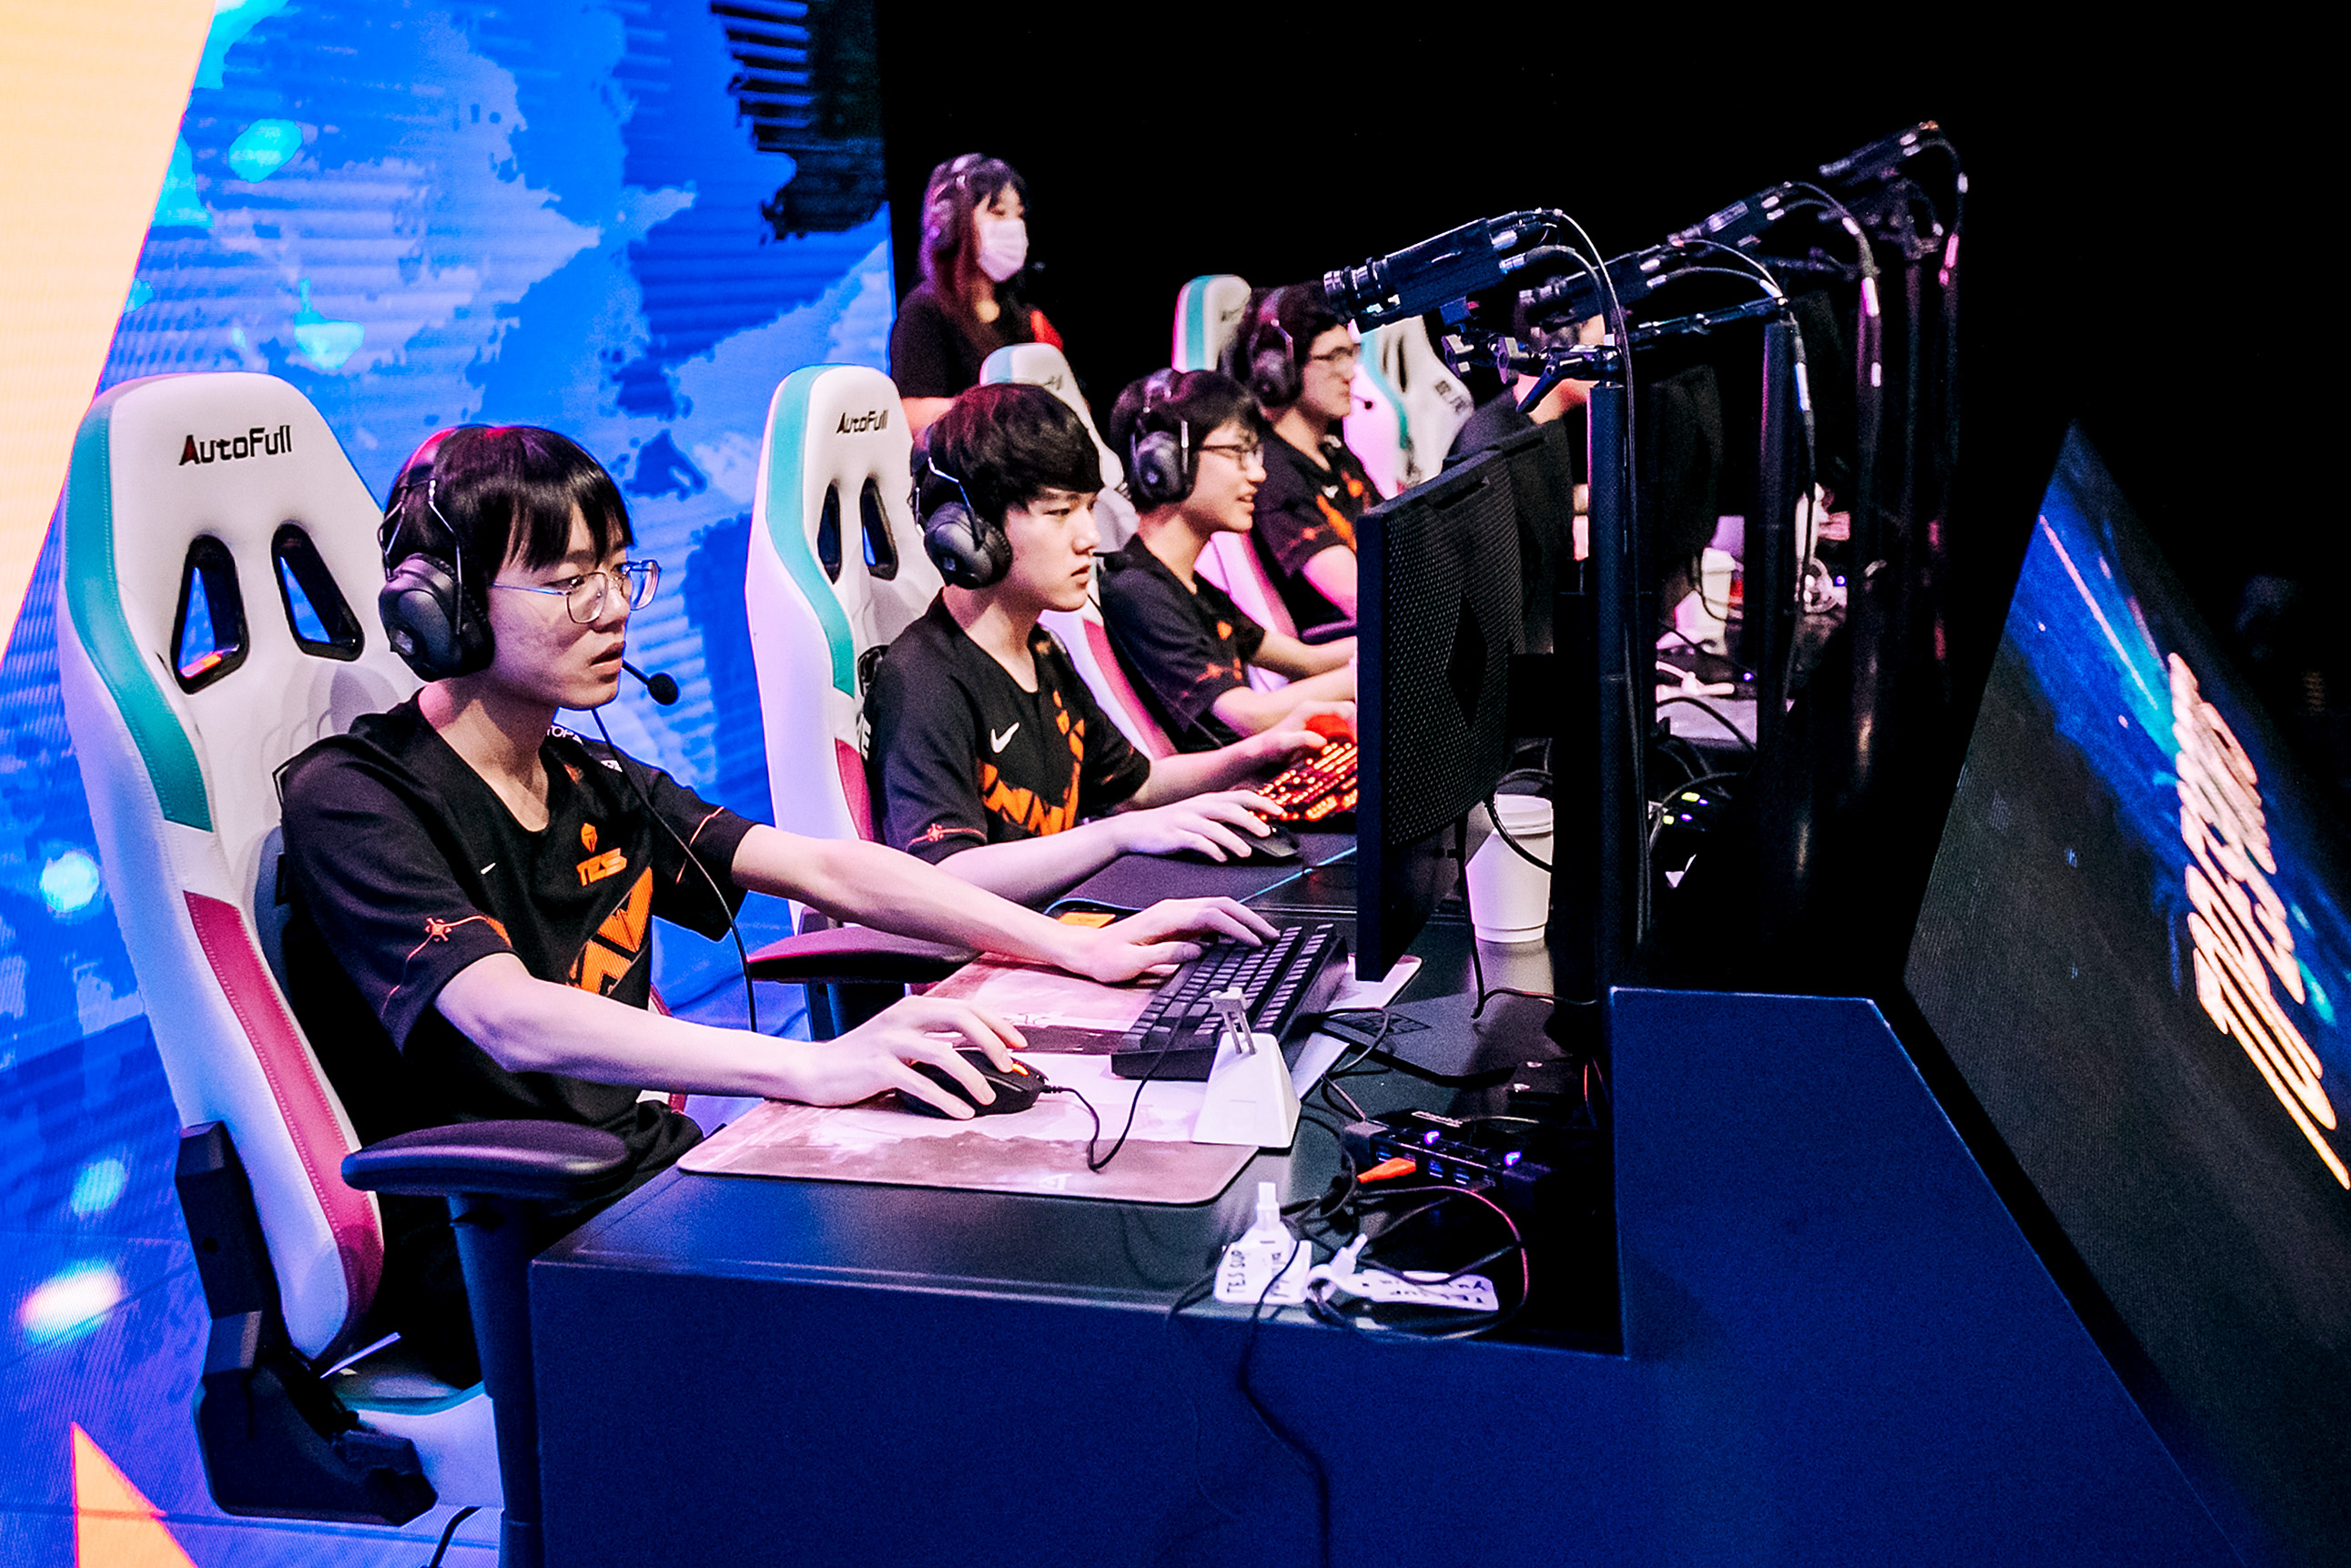 China bans under-18s from playing online games for more than an hour a day, Science & Tech News